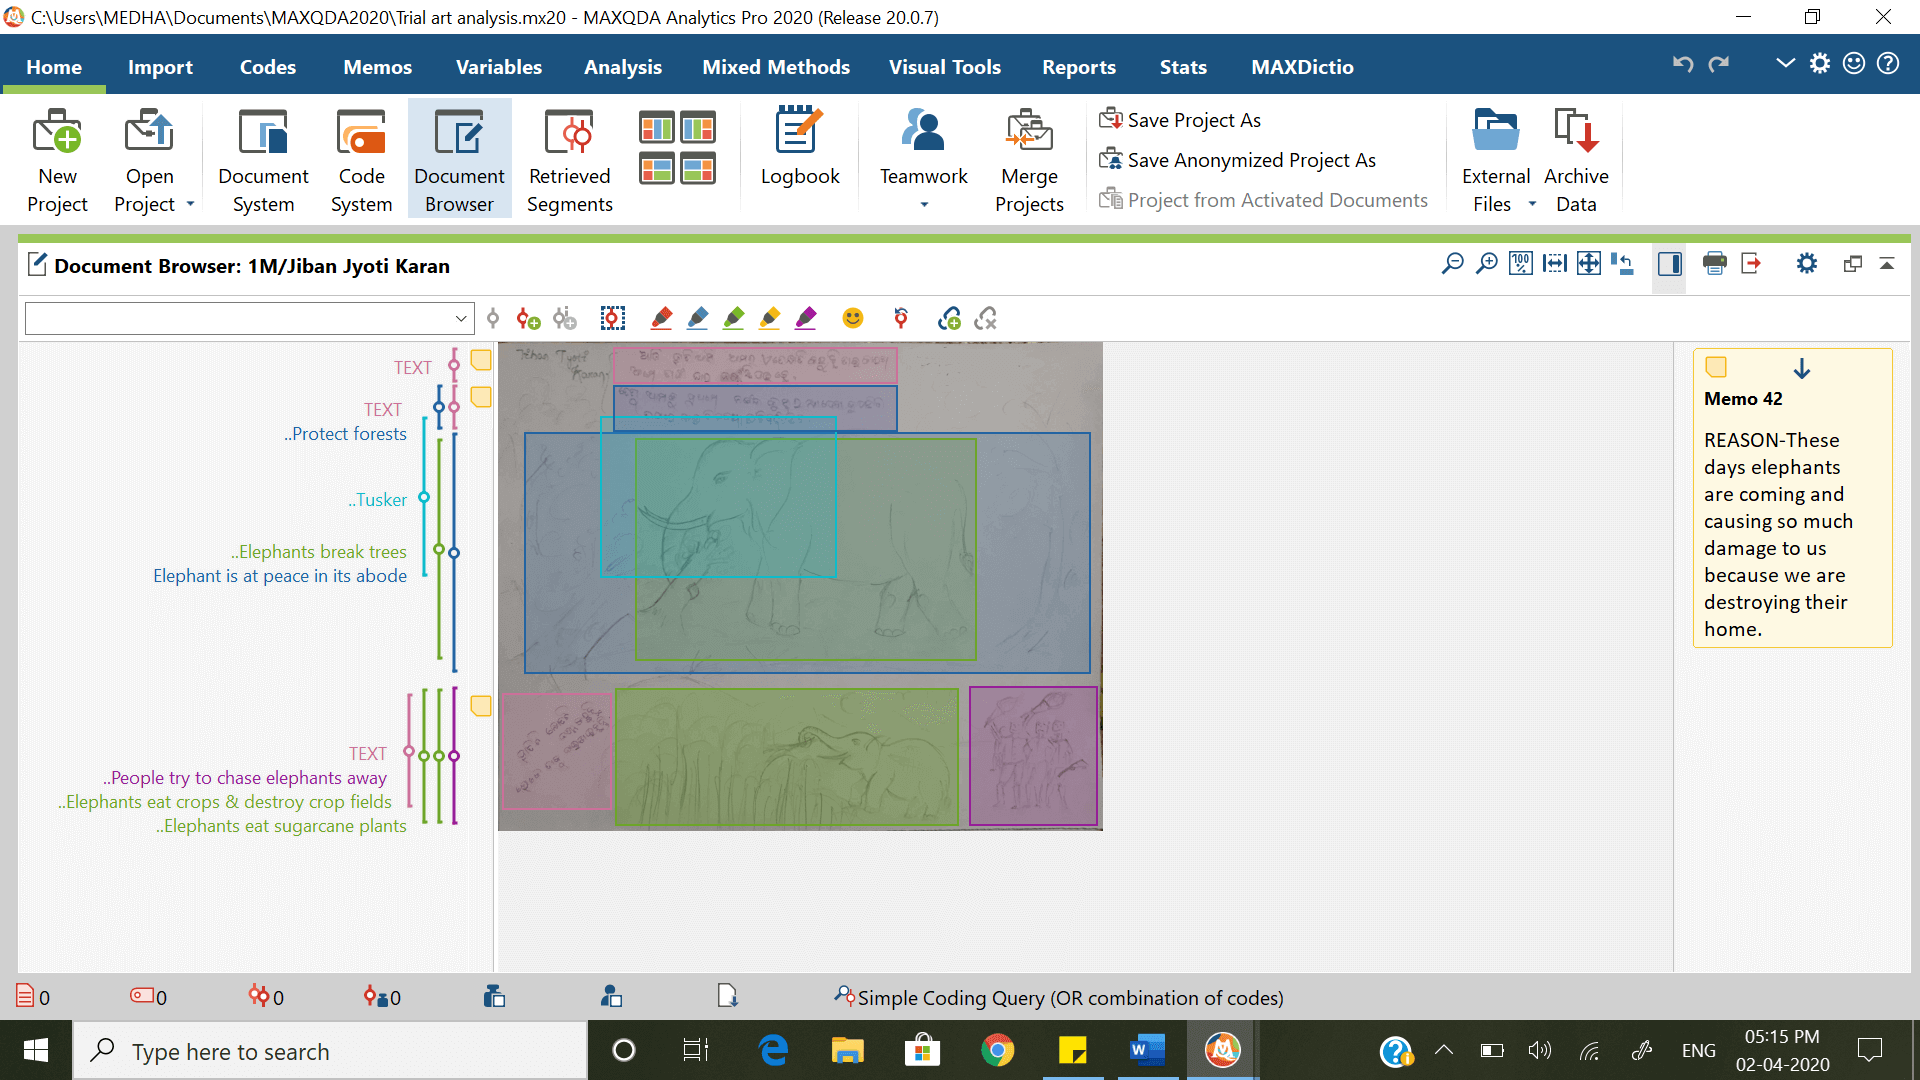 Figure 2: Screenshot from MAXQDA2020 showing the drawing from Figure 1 with coded segments. The codes appear to the left of the drawing and the memo is on the right.